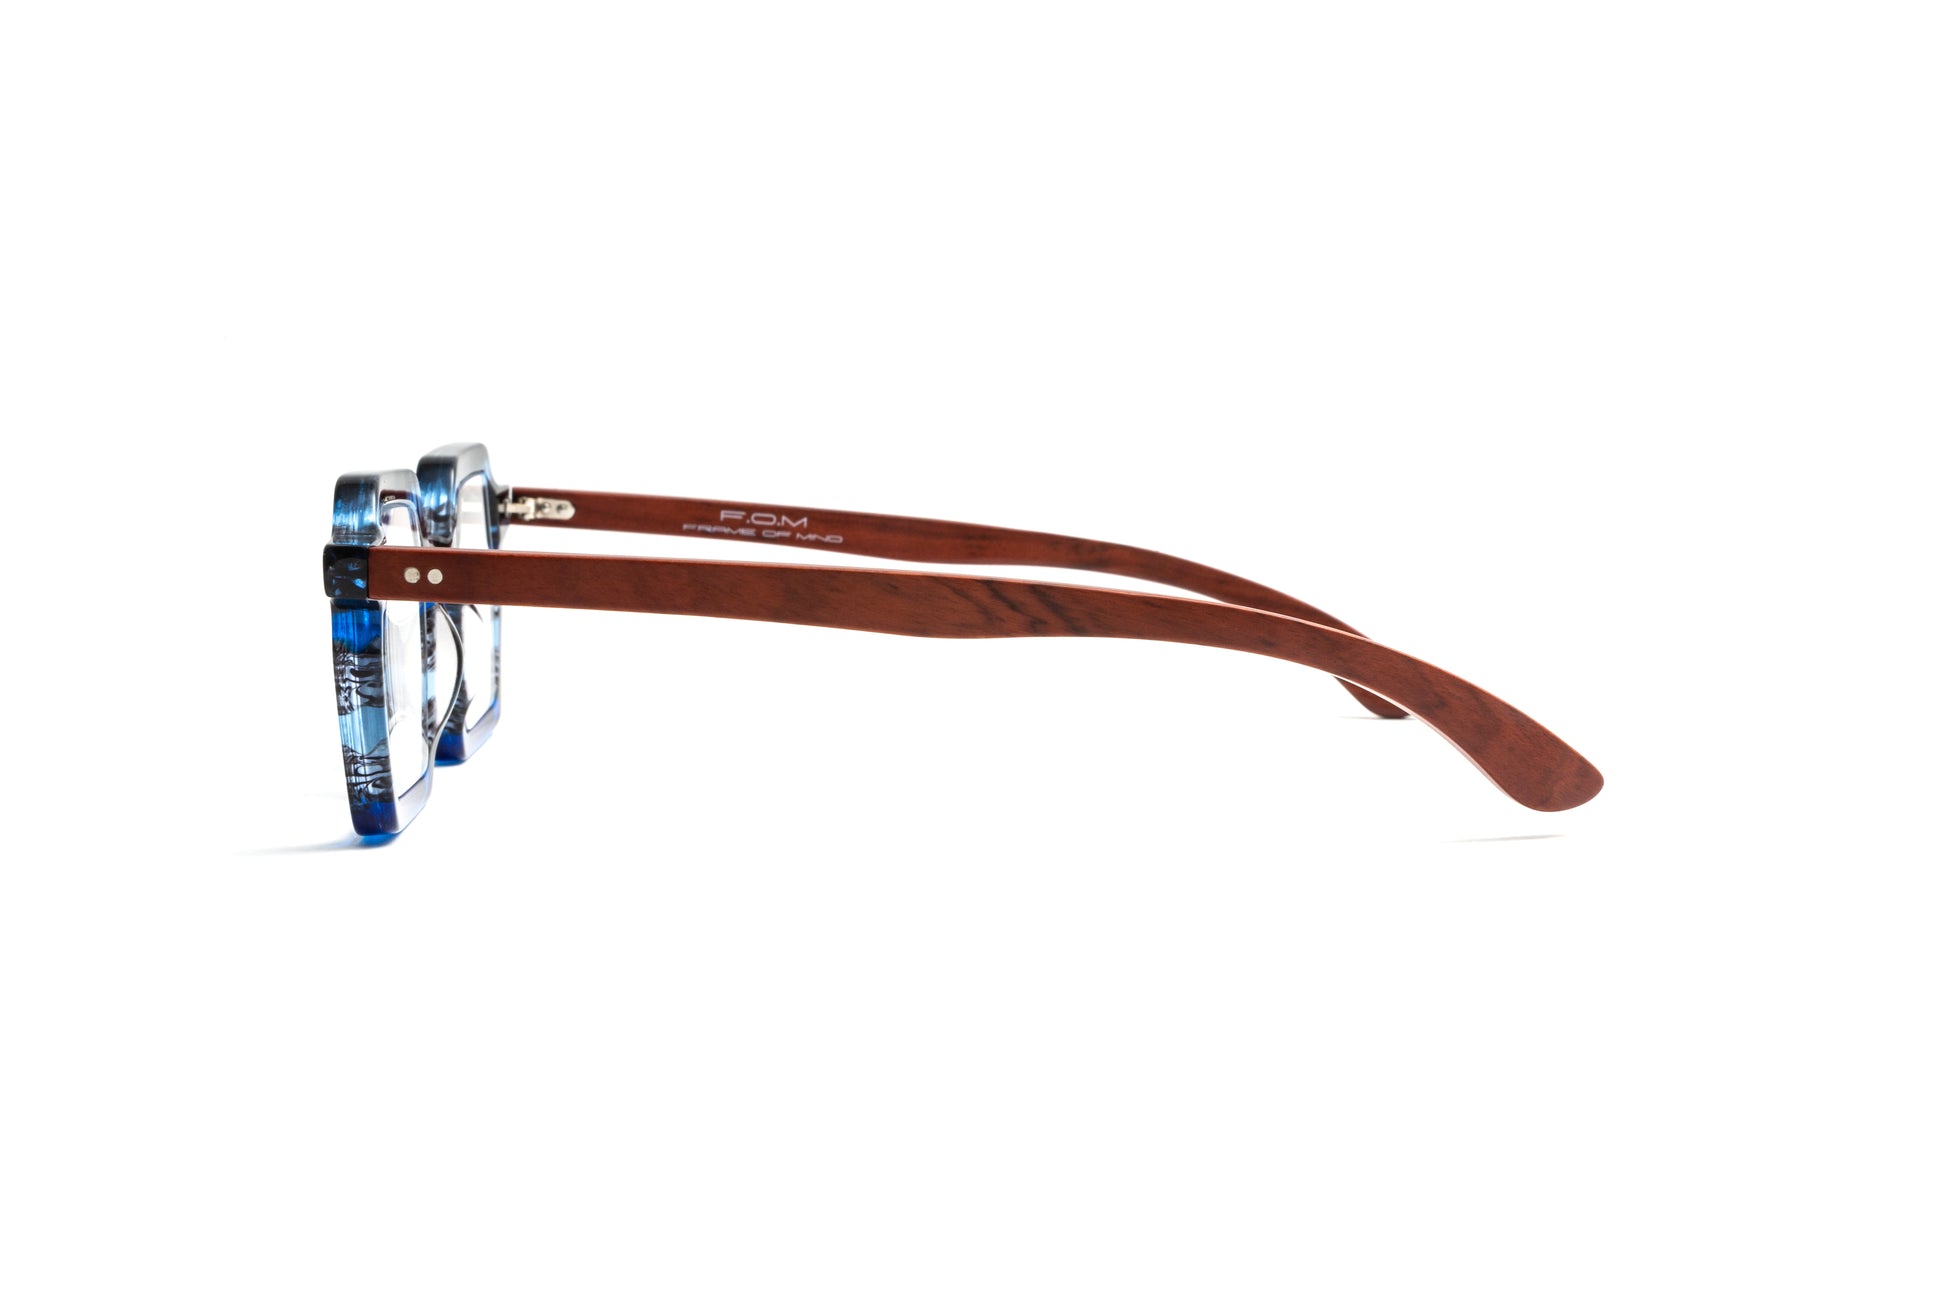 Tokyo square blue and black striped reading glasses with cherry wood temples for men and women by Eyejets